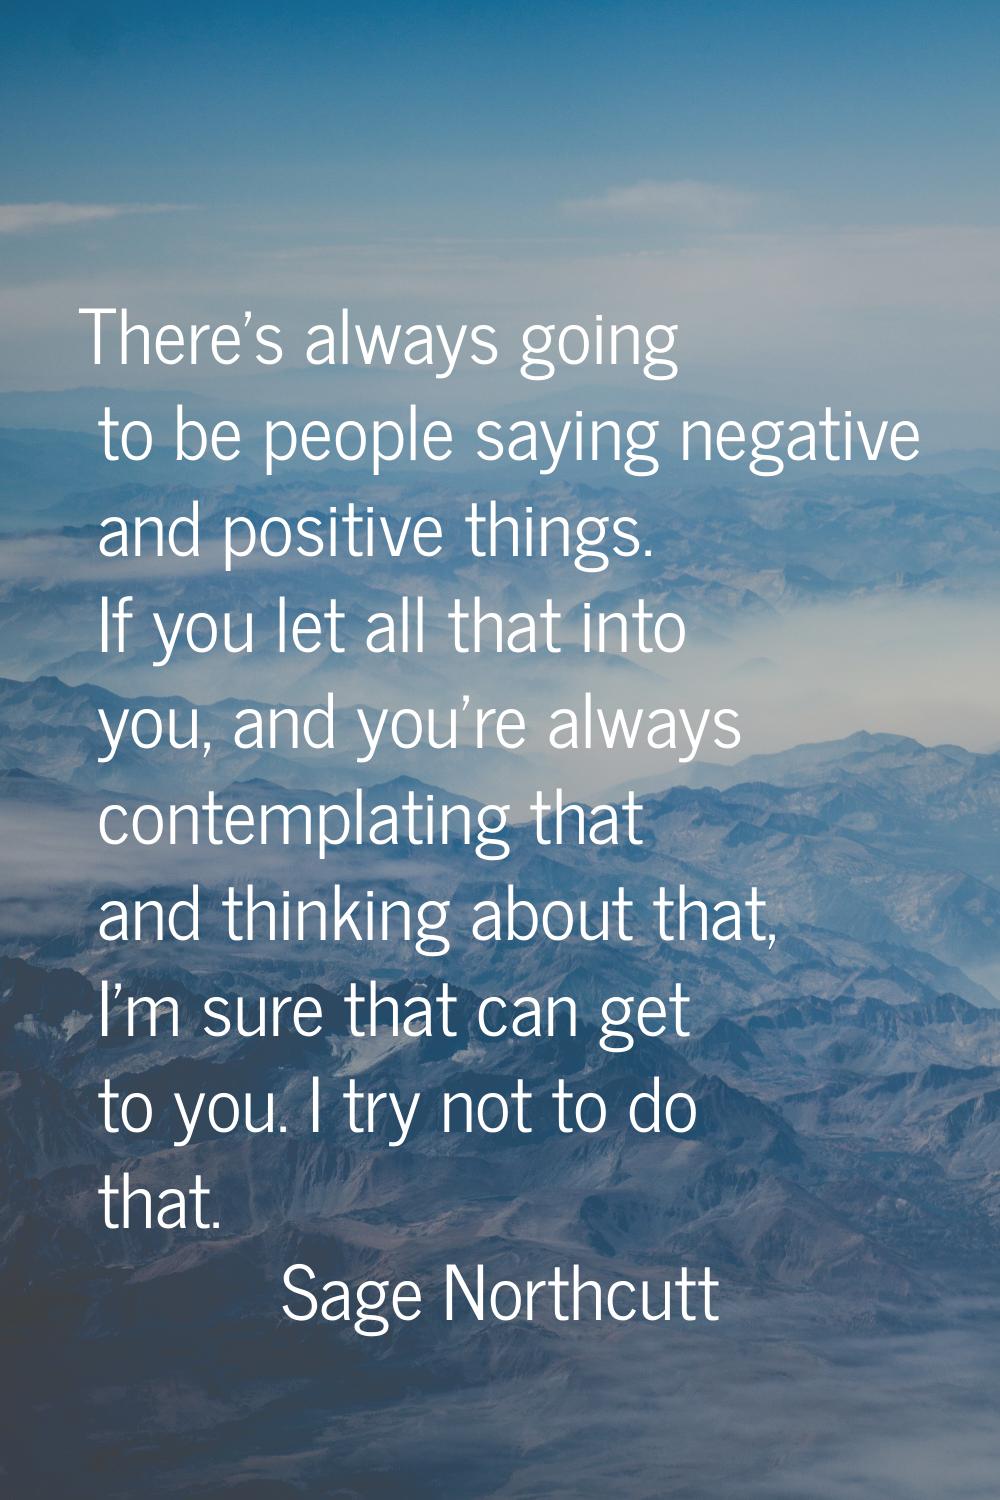 There's always going to be people saying negative and positive things. If you let all that into you